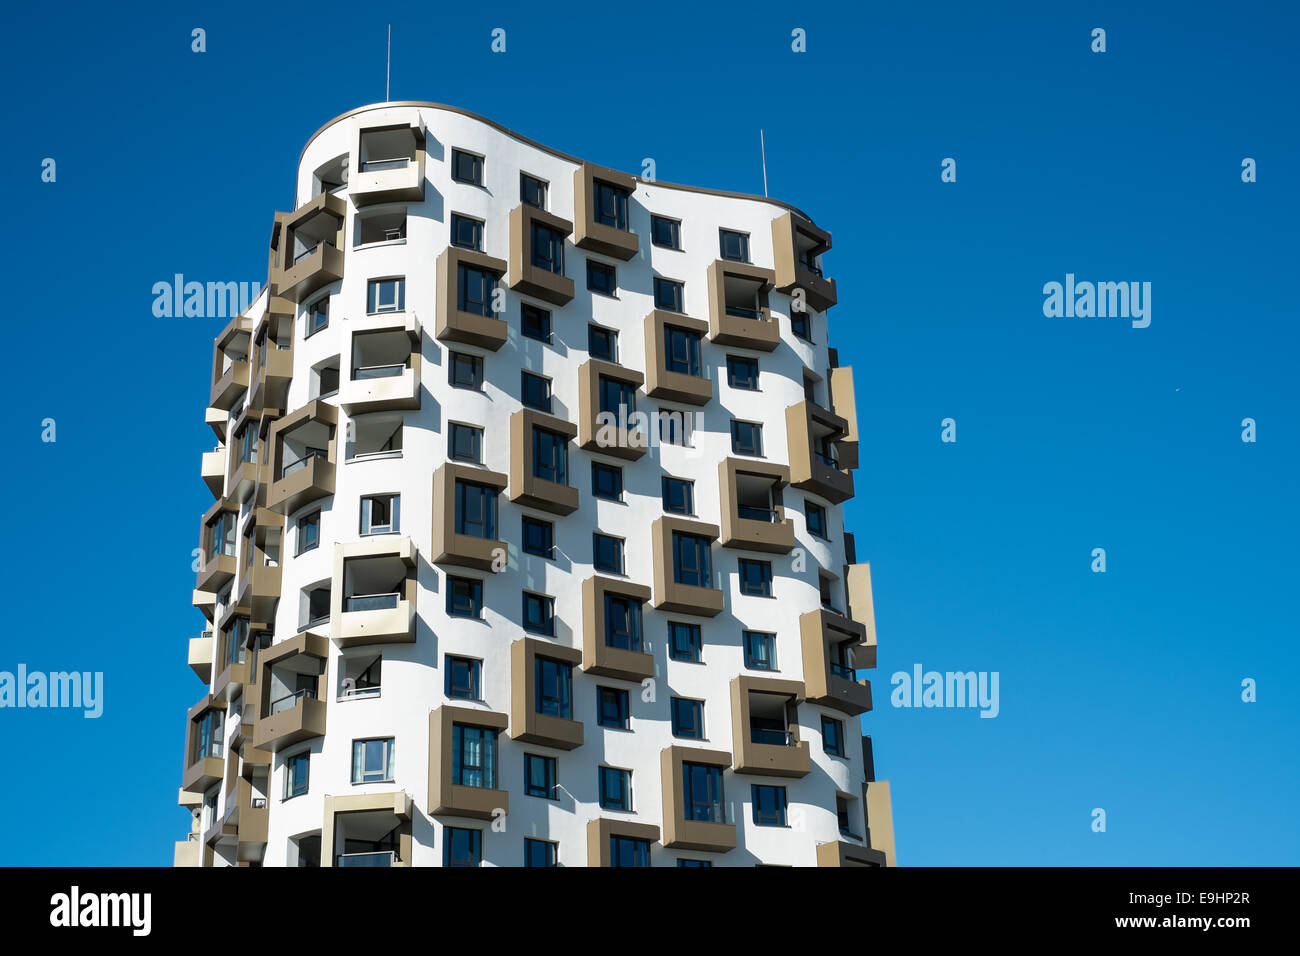 The residence tower 'Isarbelle' located in a development area in Munich, Germany. Stock Photo